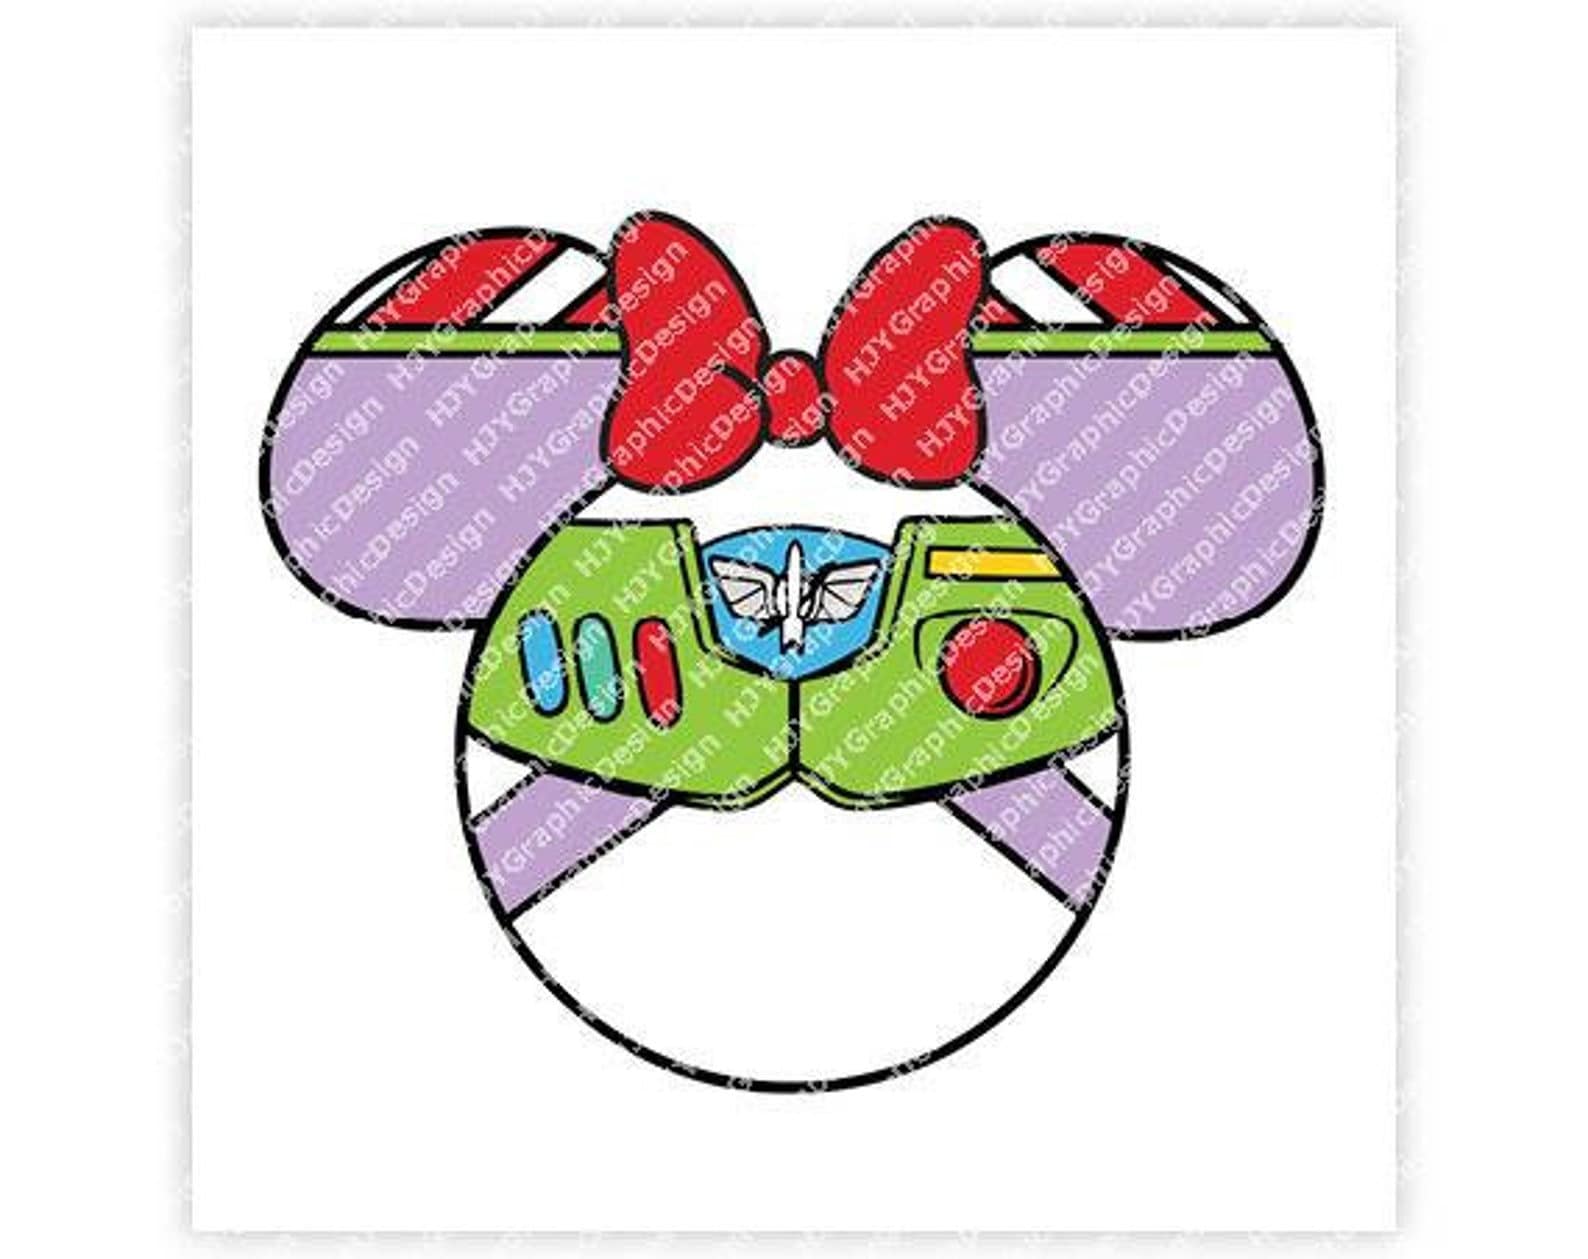 minnie mouse pack of 2 Motif Iron/Sew On